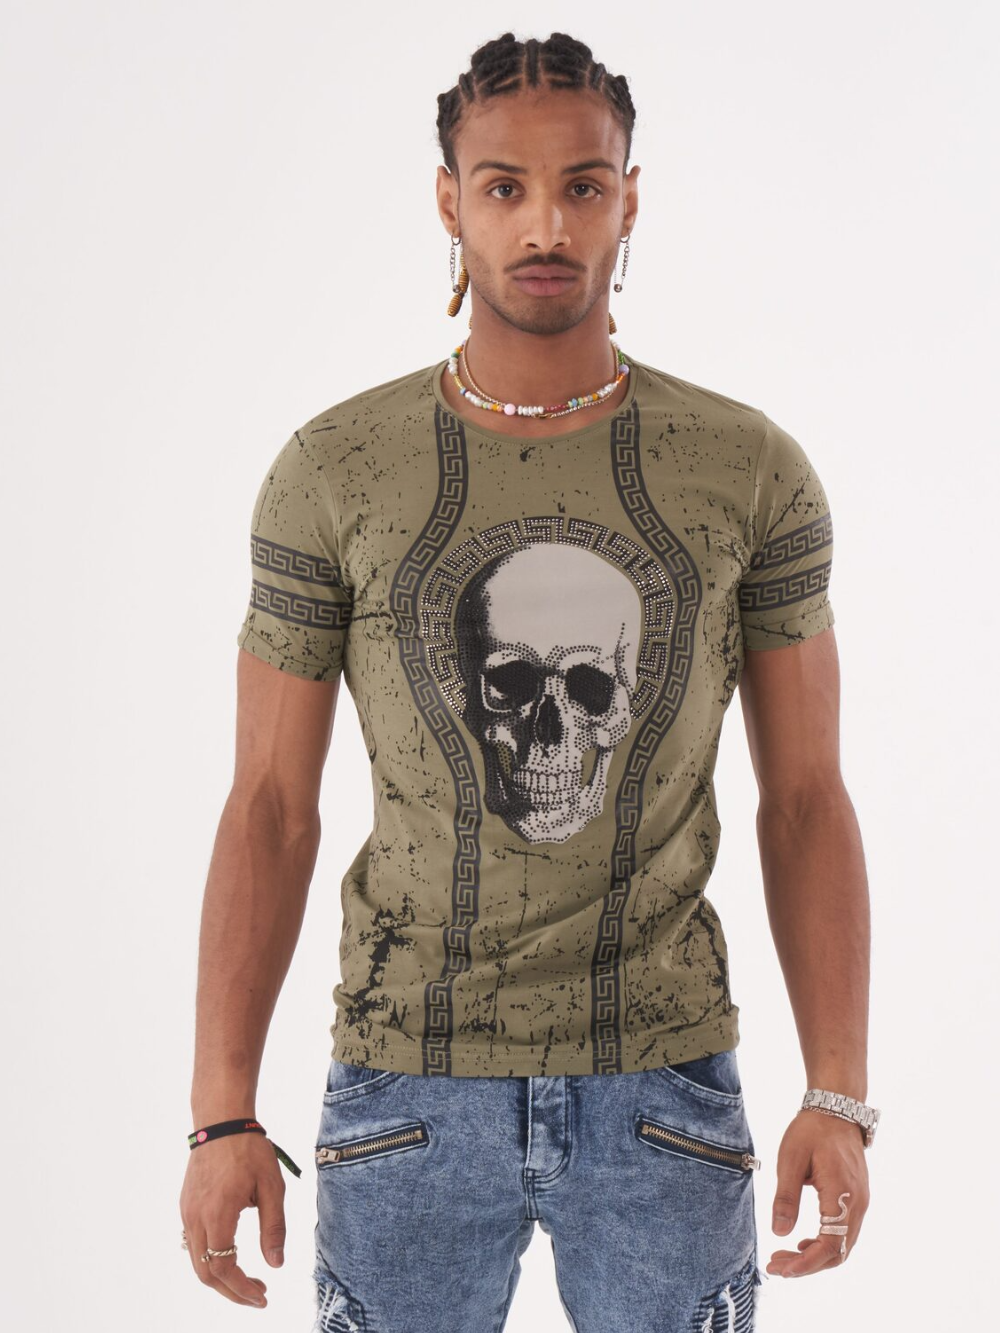 A man wearing an AFTERLIFE T-shirt with a skull on it.